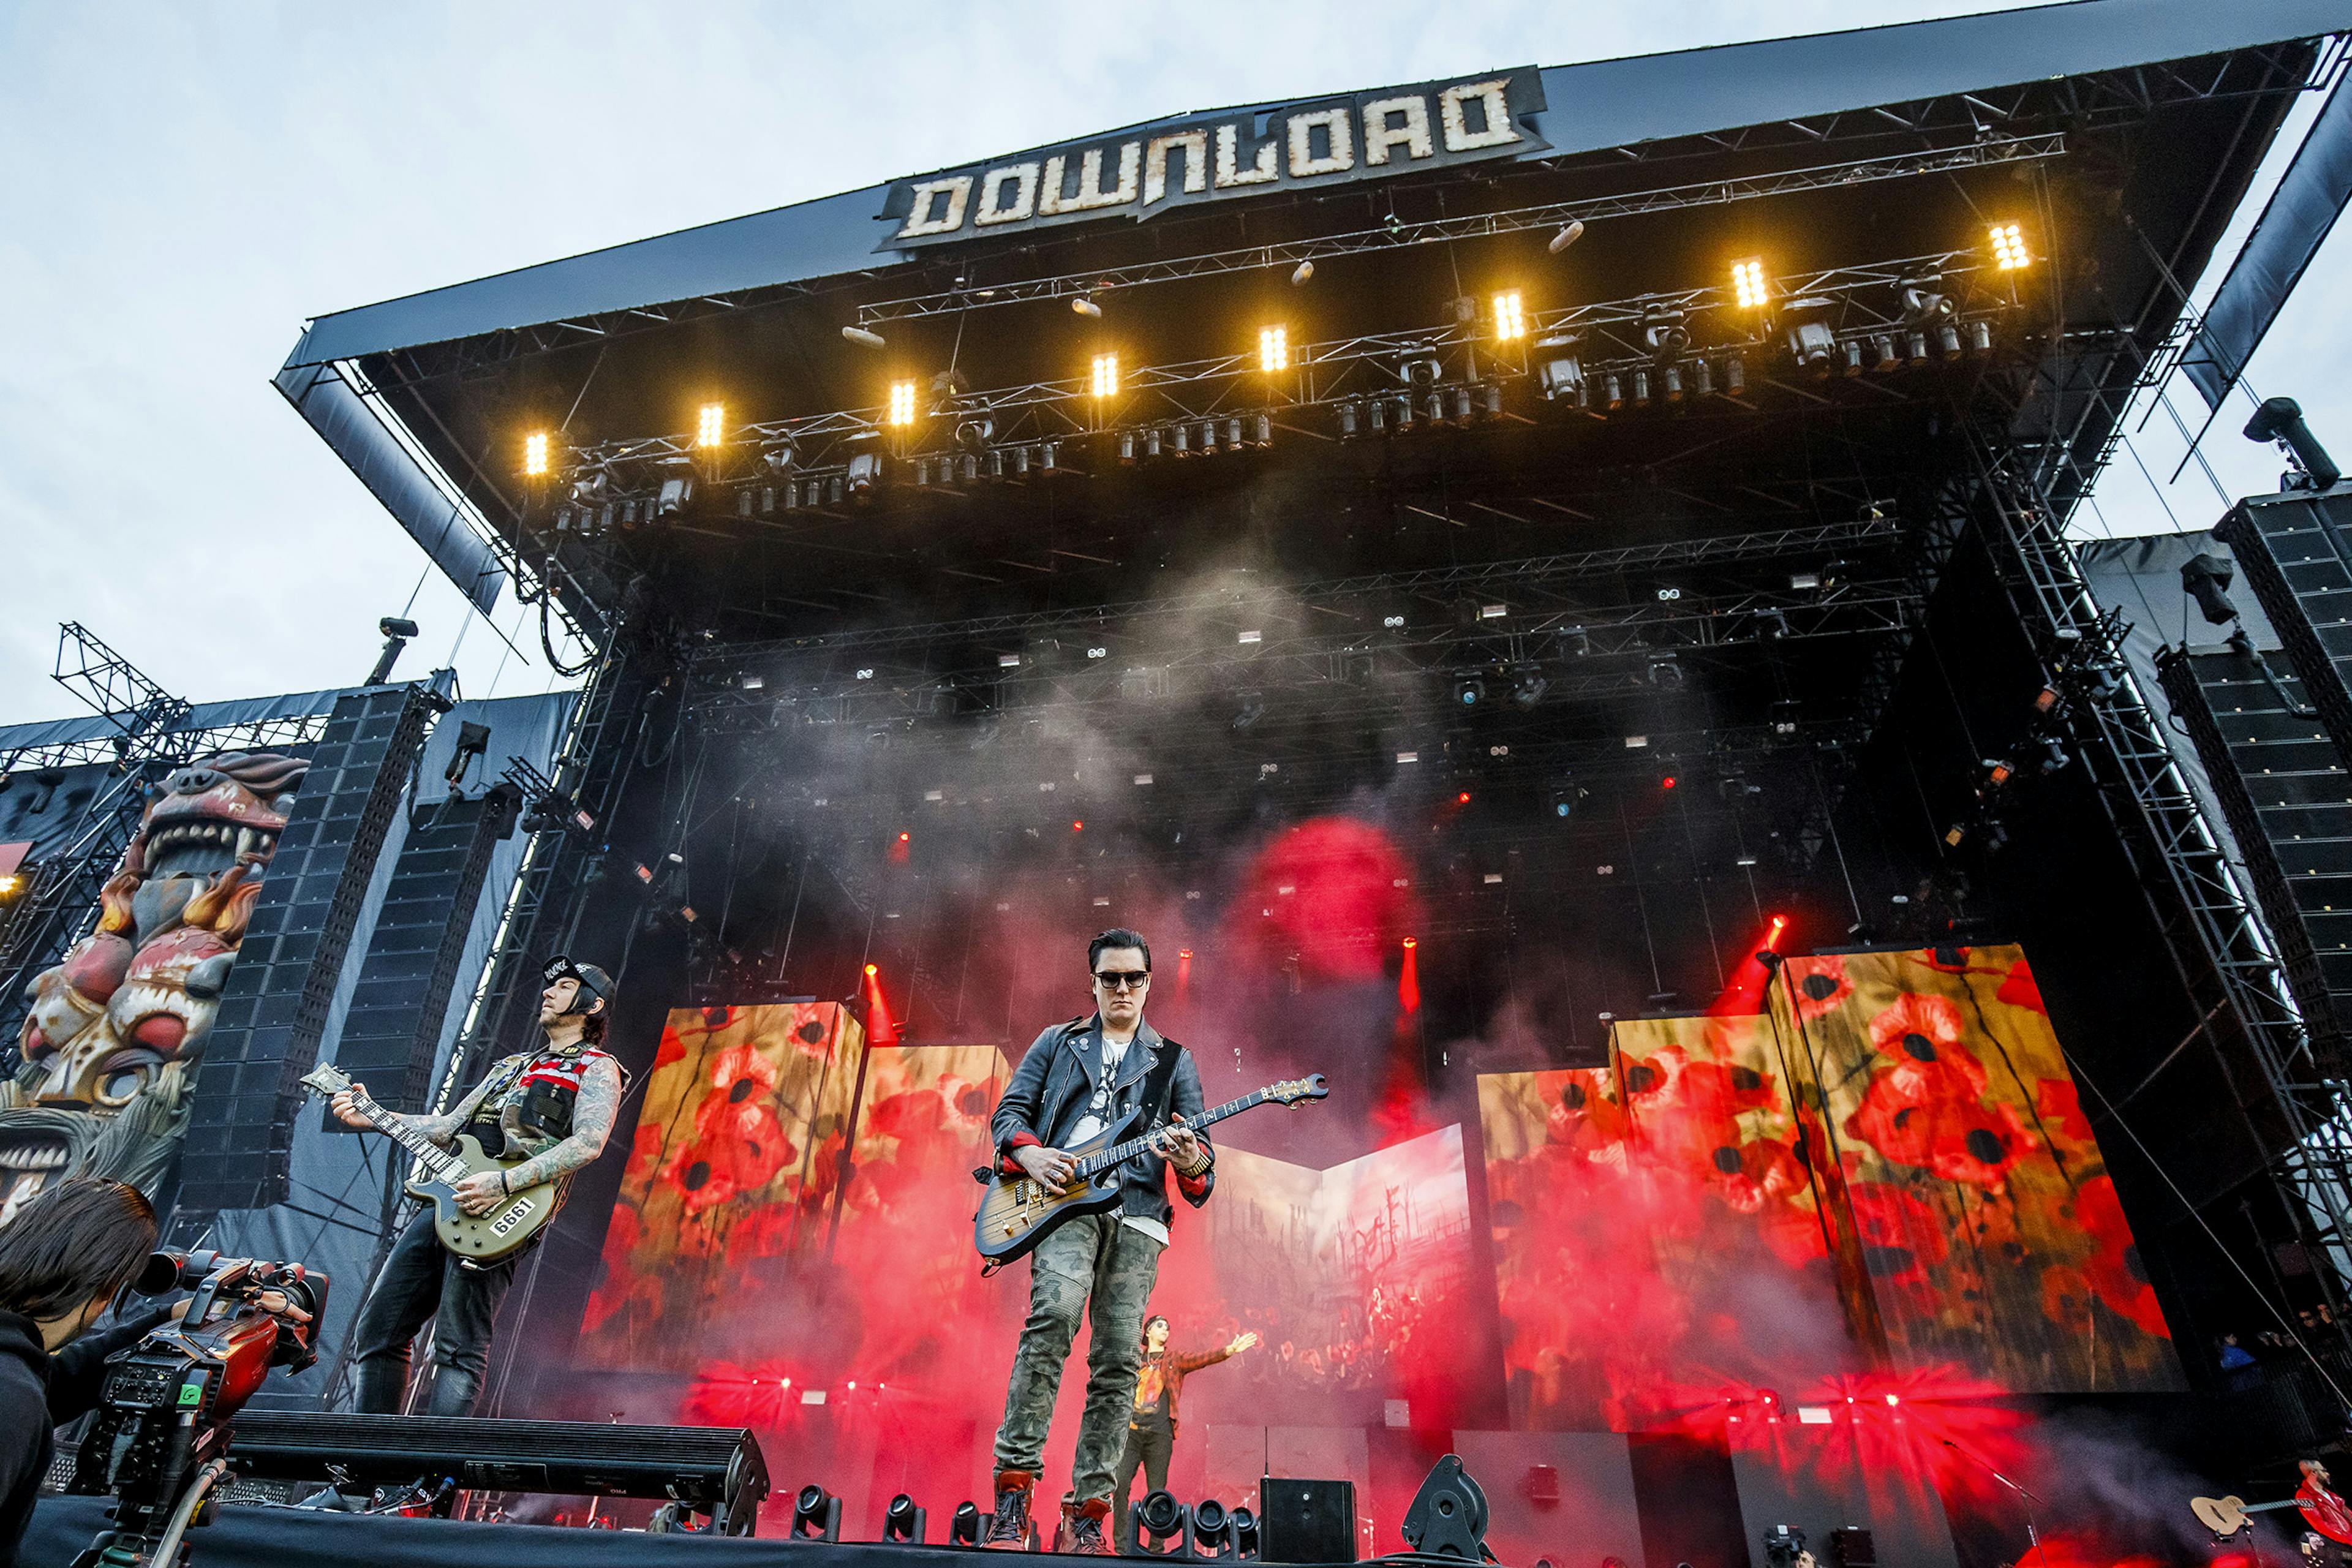 Touring Generates "99.9 Per Cent" Of Avenged Sevenfold's Income